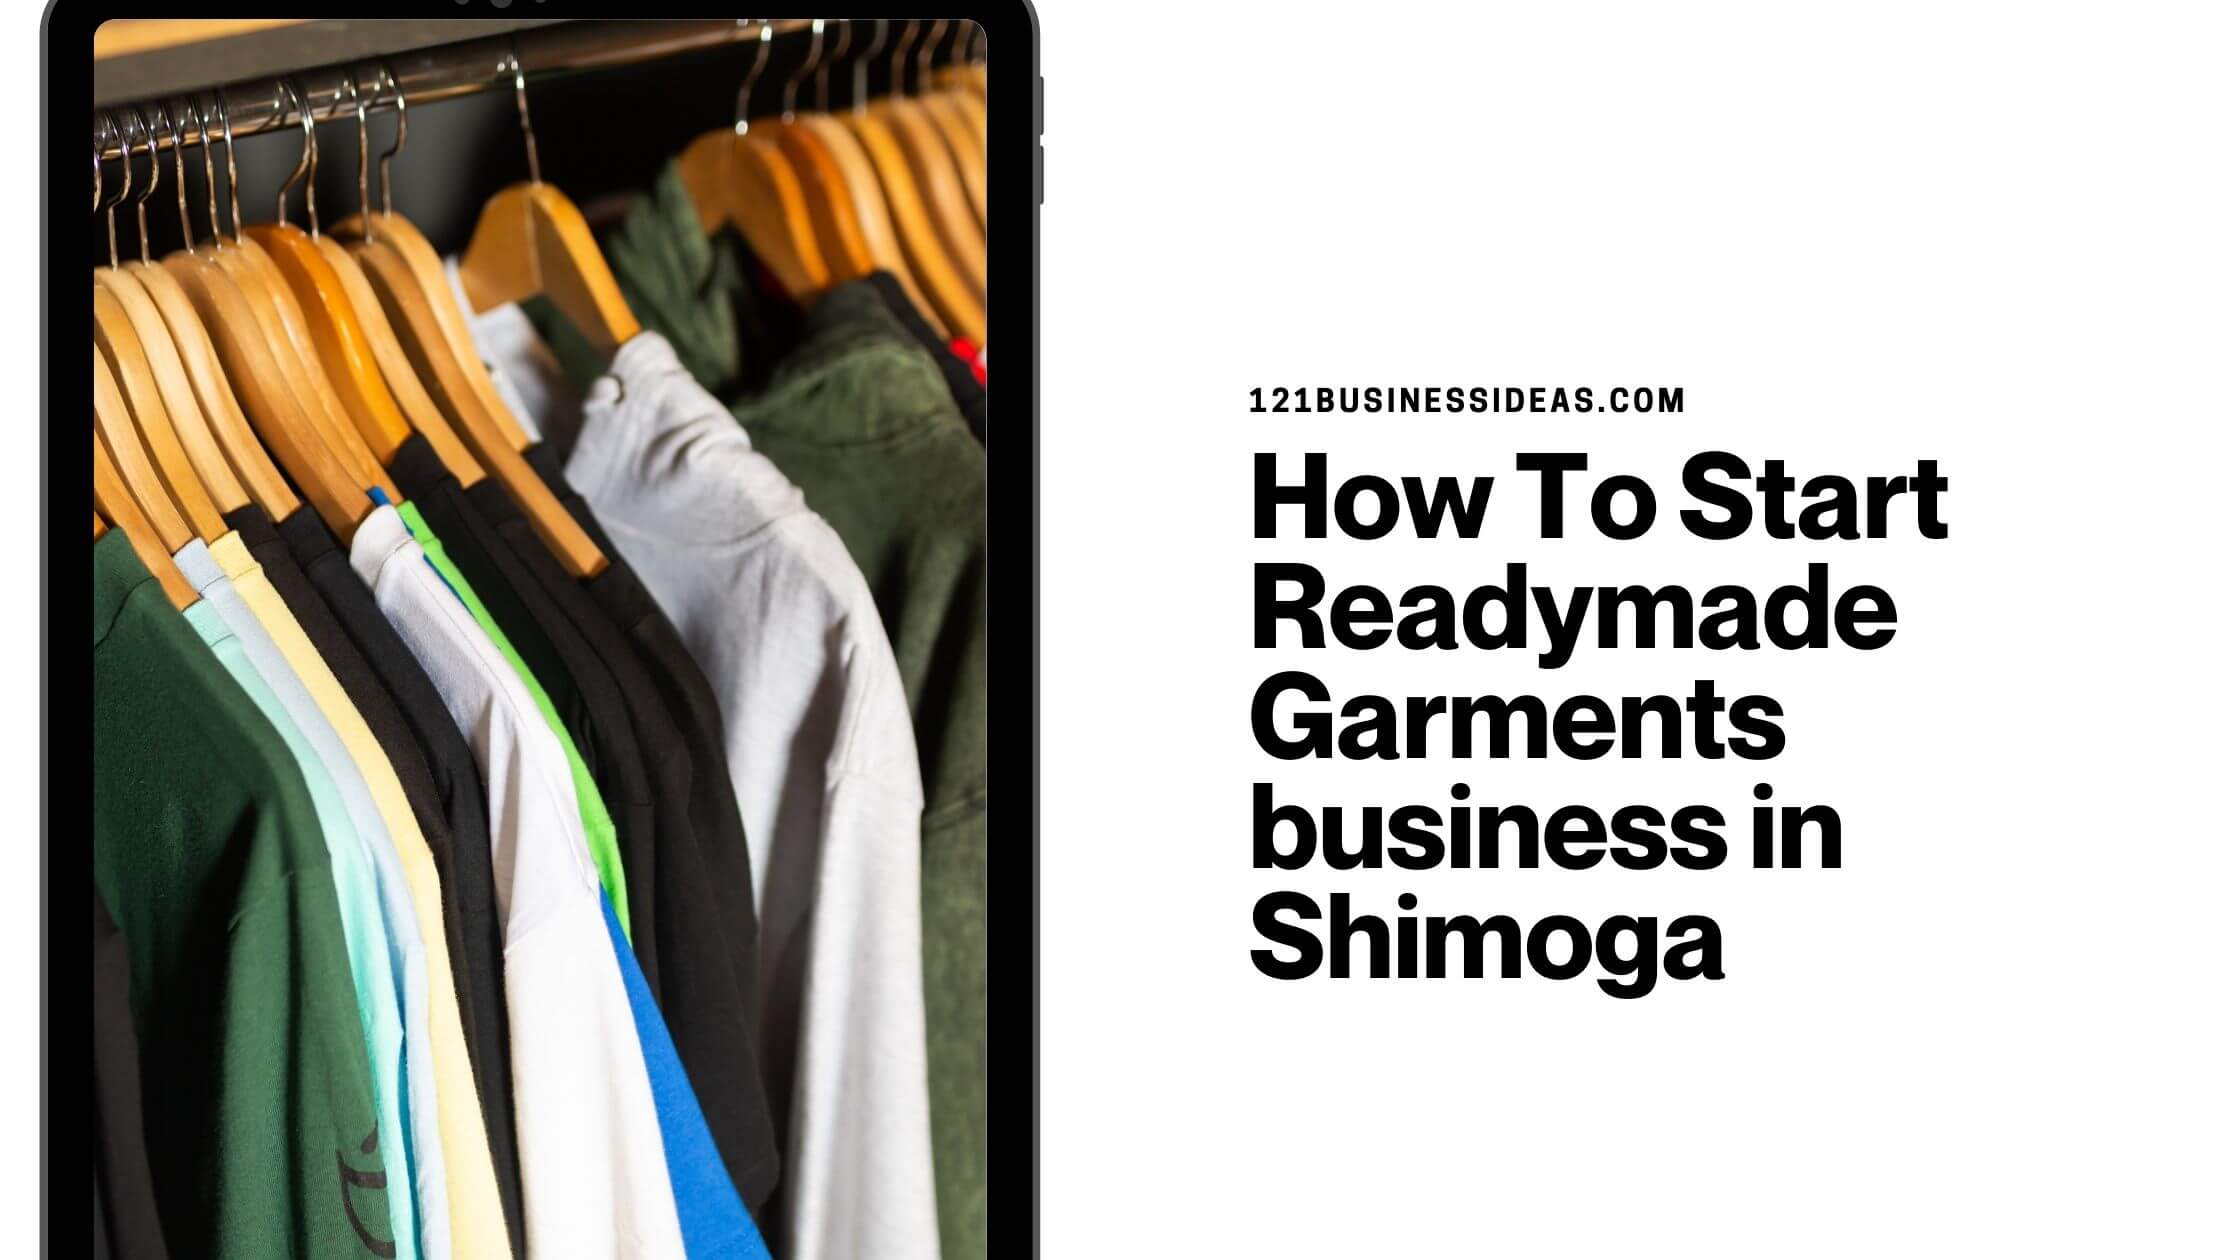 How To Start Readymade Garments business in Shimoga (2)